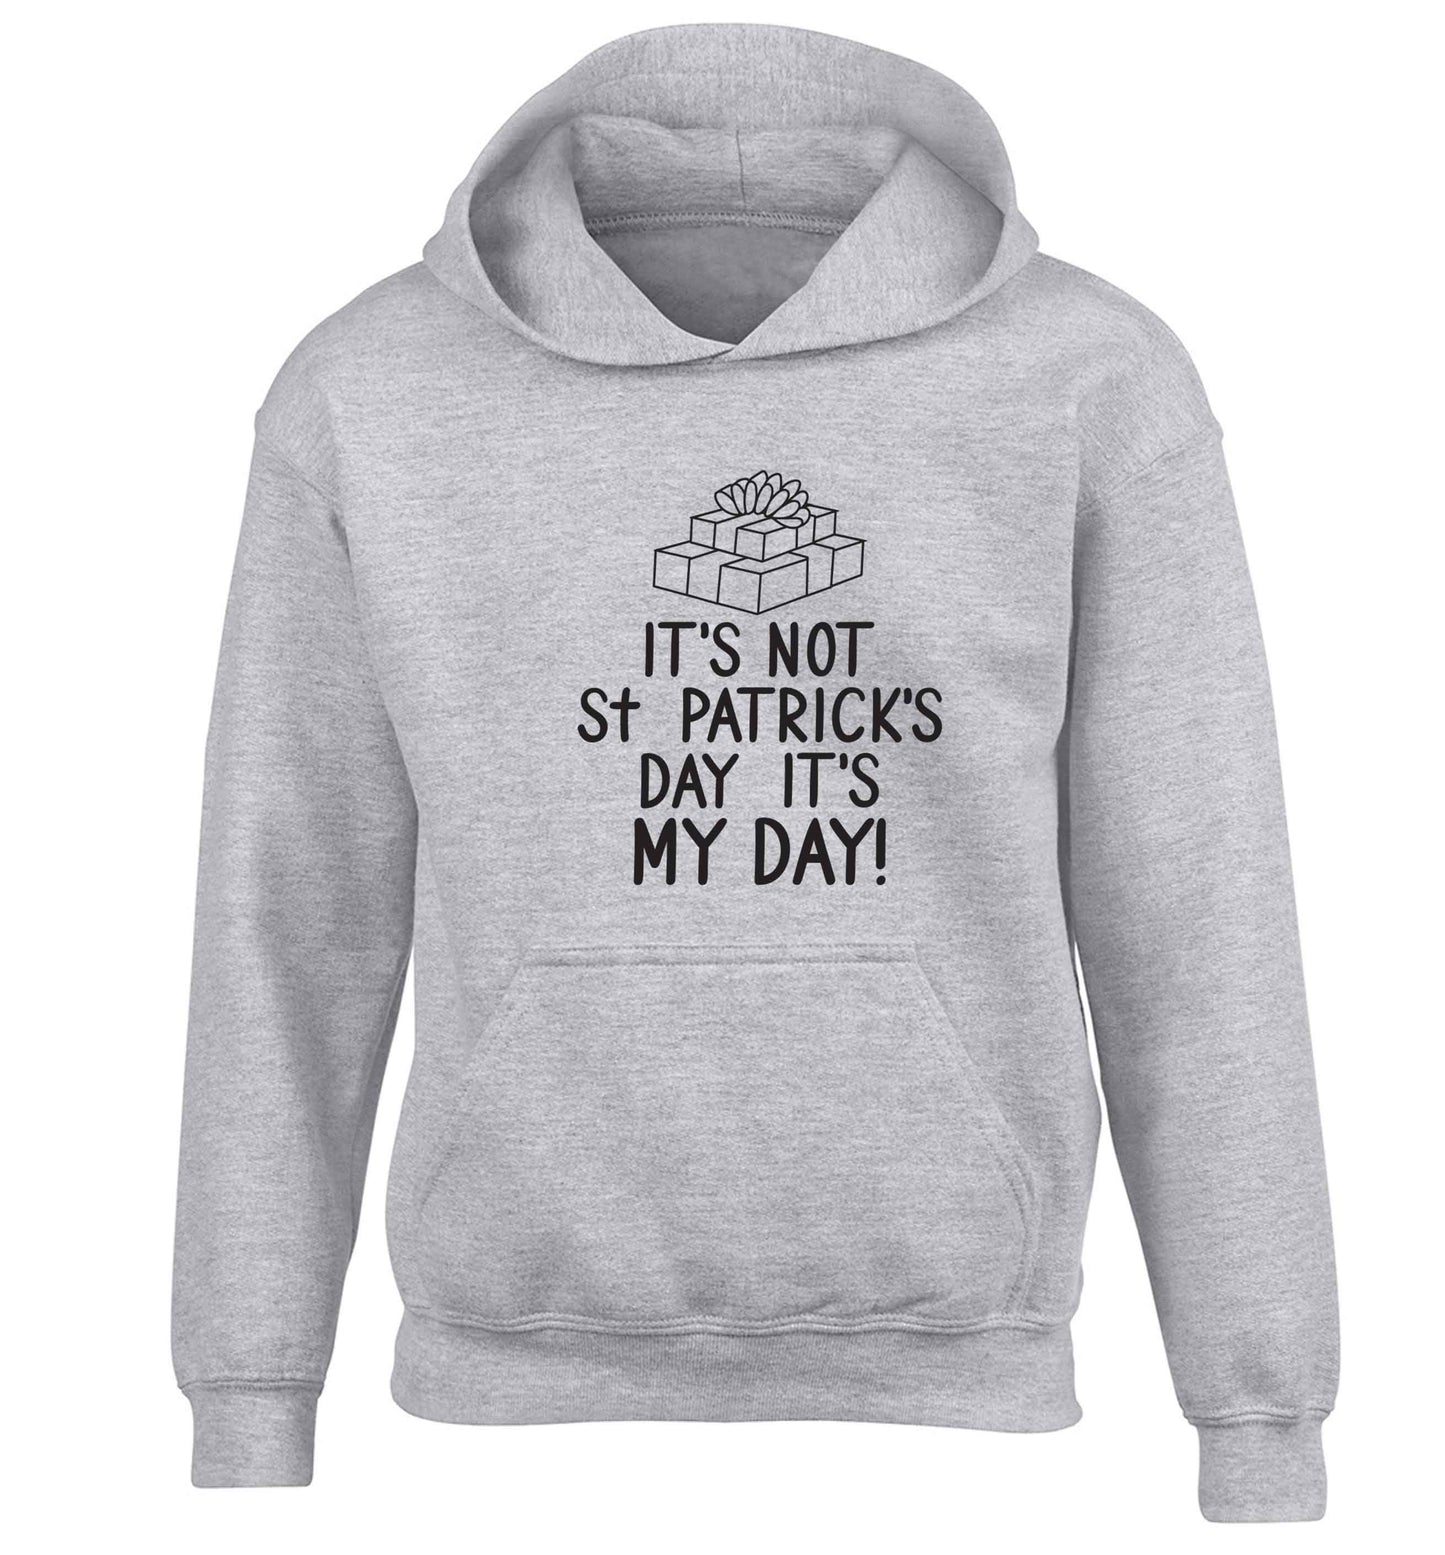 Funny gifts for your mum on mother's dayor her birthday! It's not St Patricks day it's my day children's grey hoodie 12-13 Years